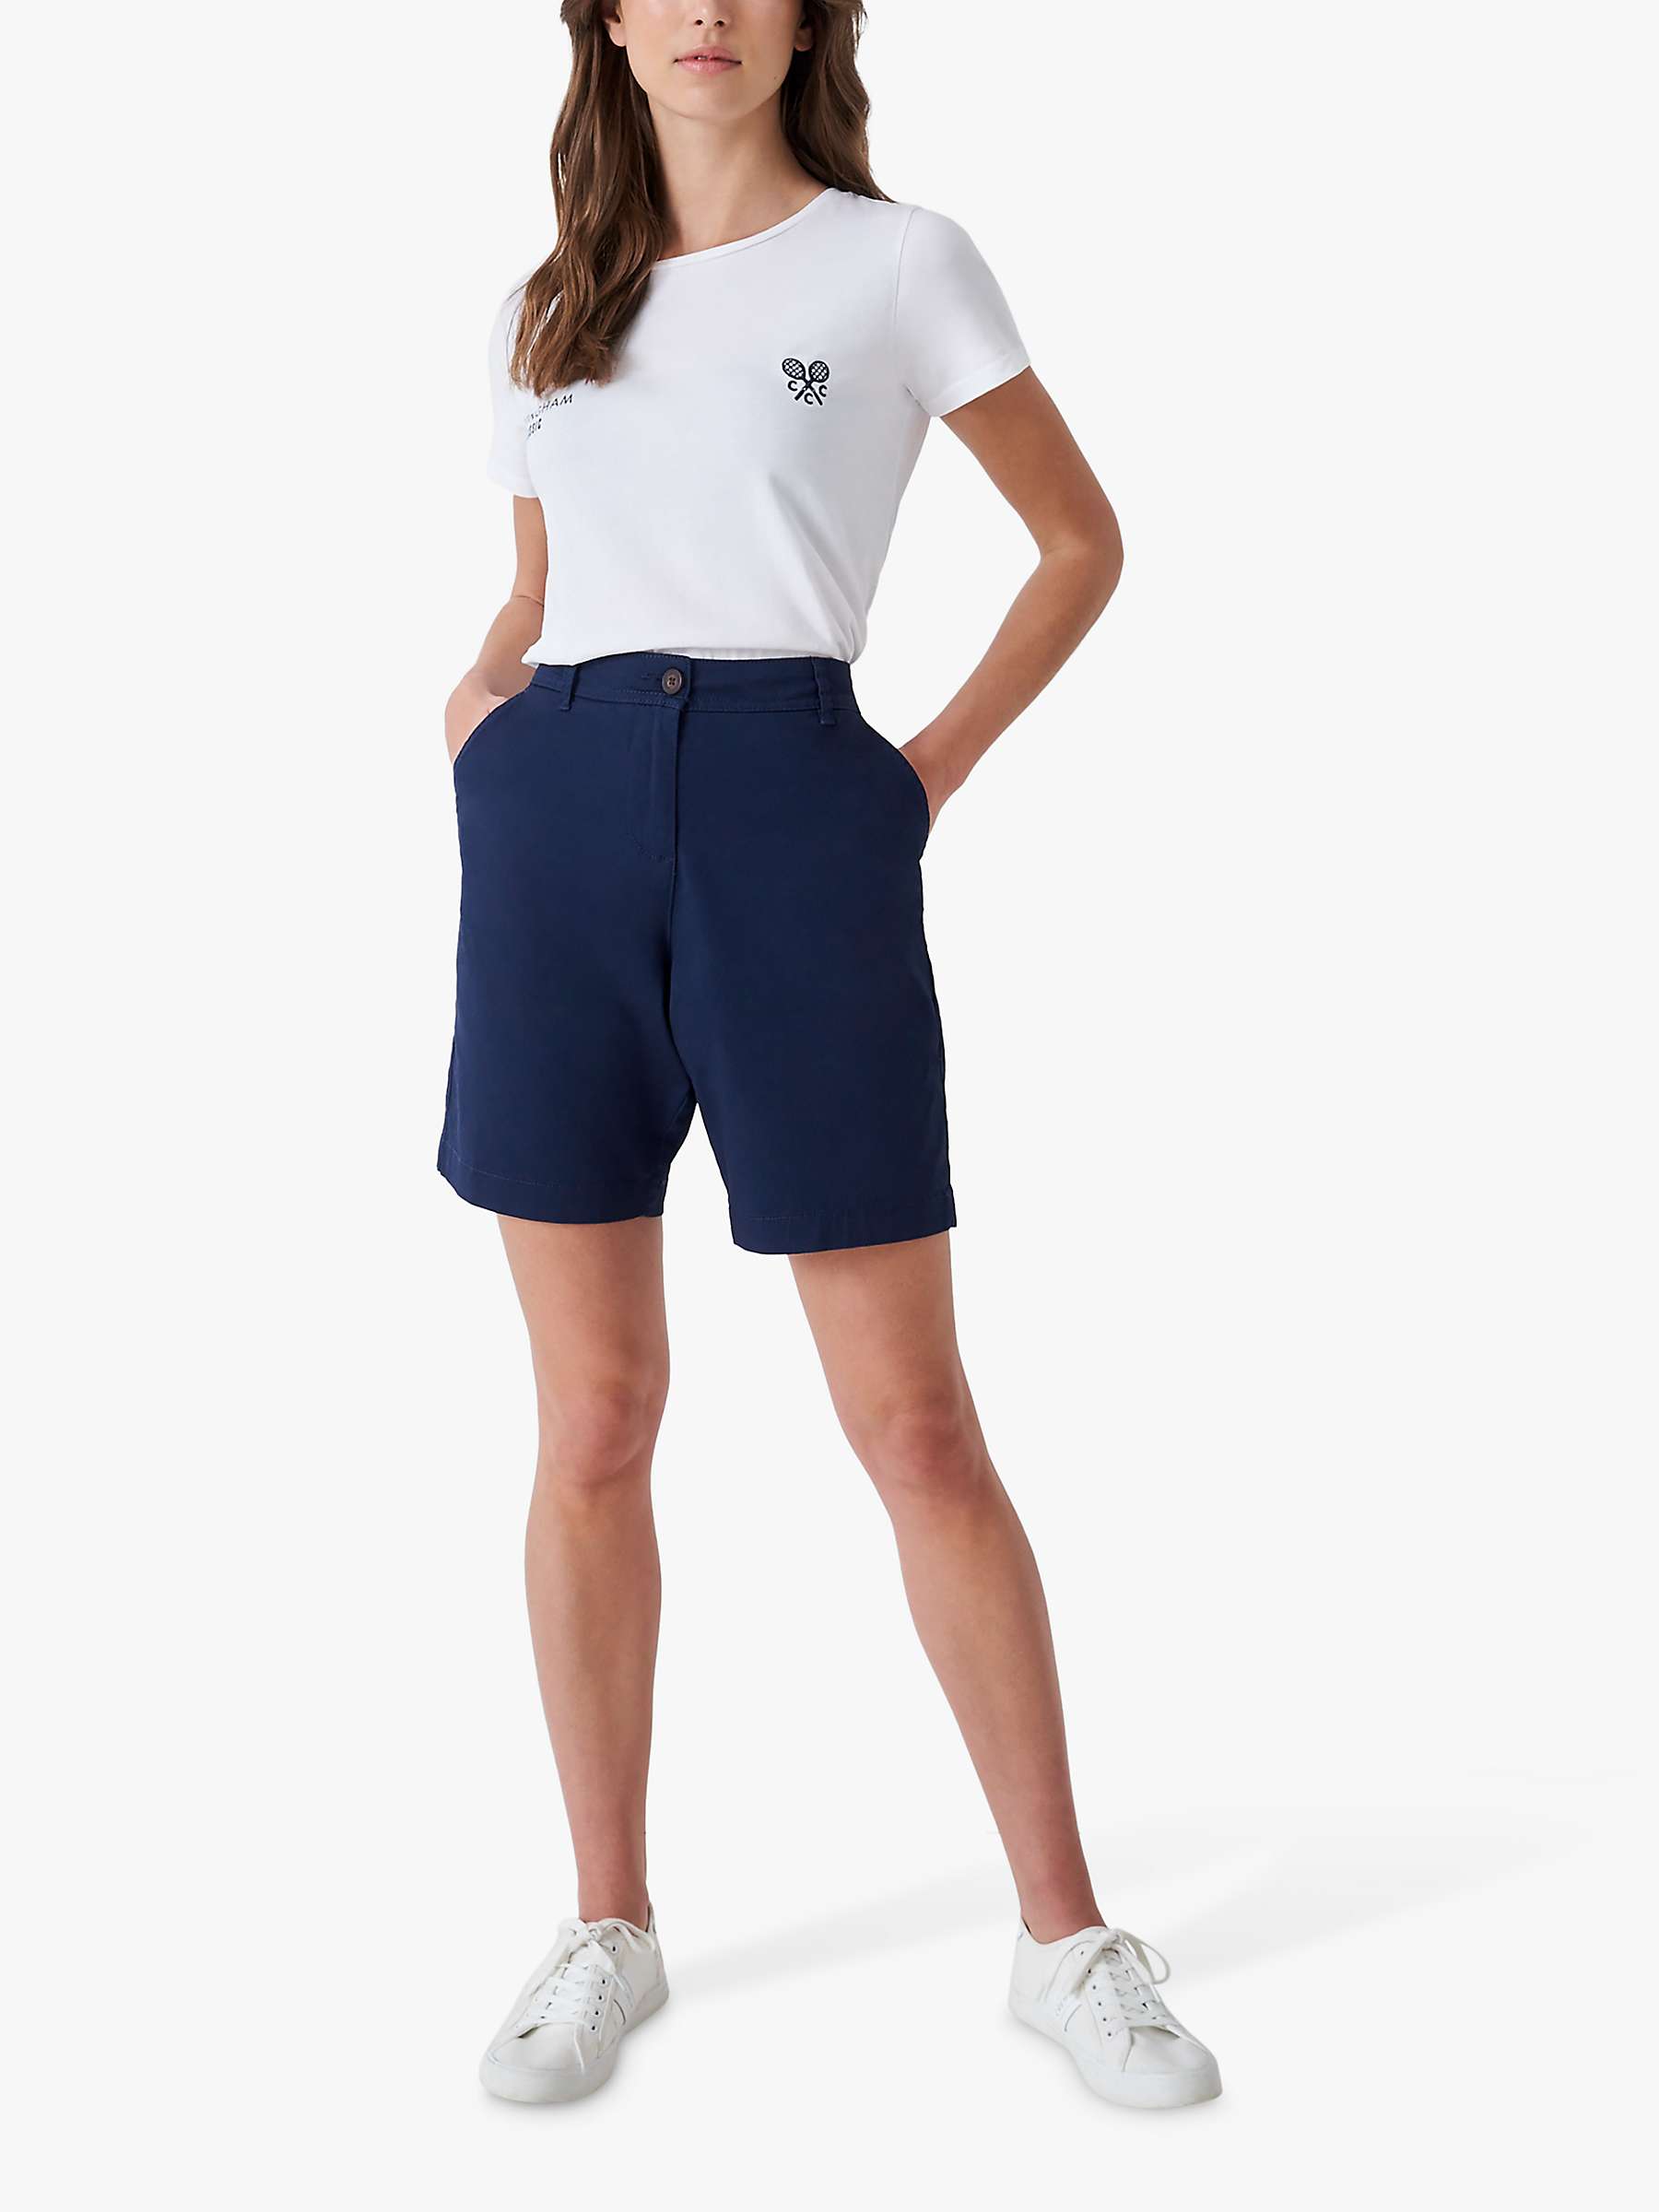 Buy Crew Clothing Chino Shorts Online at johnlewis.com